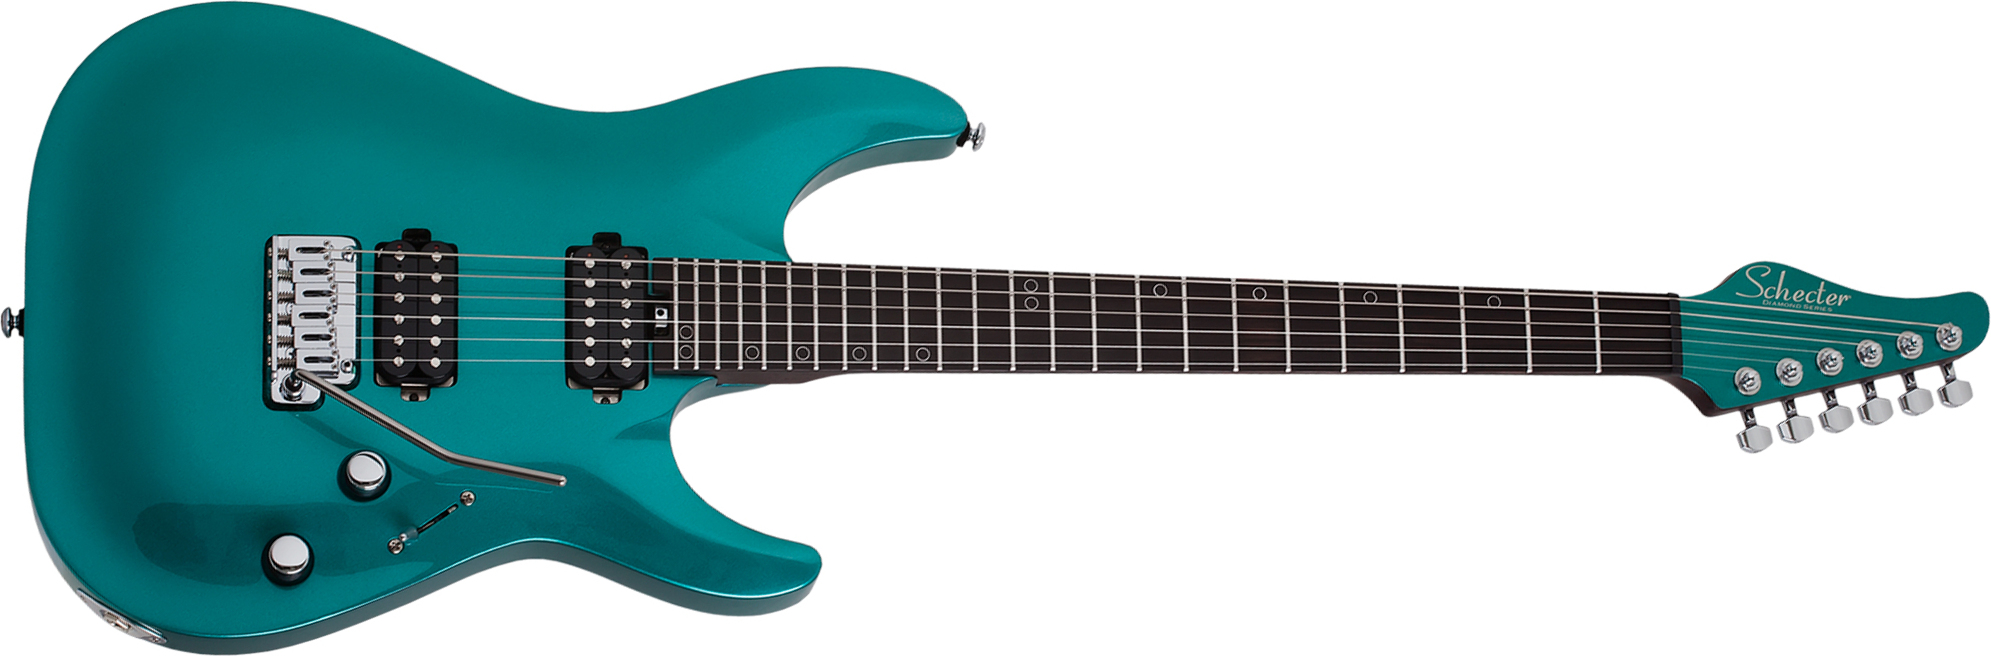 Schecter Aaron Marshall Am-6 Signature 2h Trem Eb - Artic Jade - E-Gitarre in Str-Form - Main picture